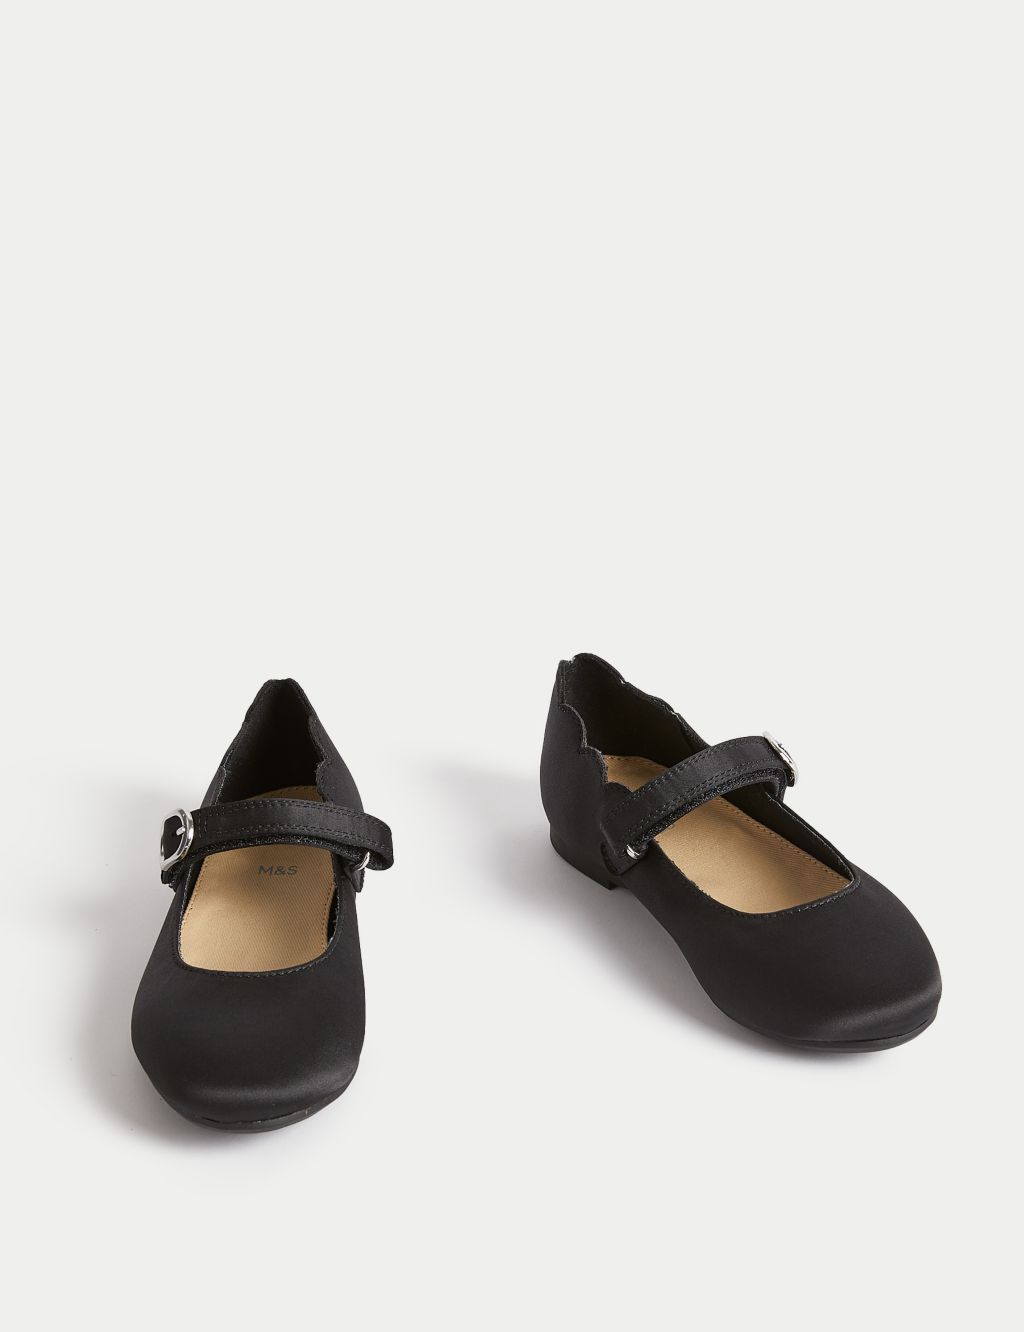 Kids' Satin Mary Jane Shoes (4 Small - 13 Small) image 2